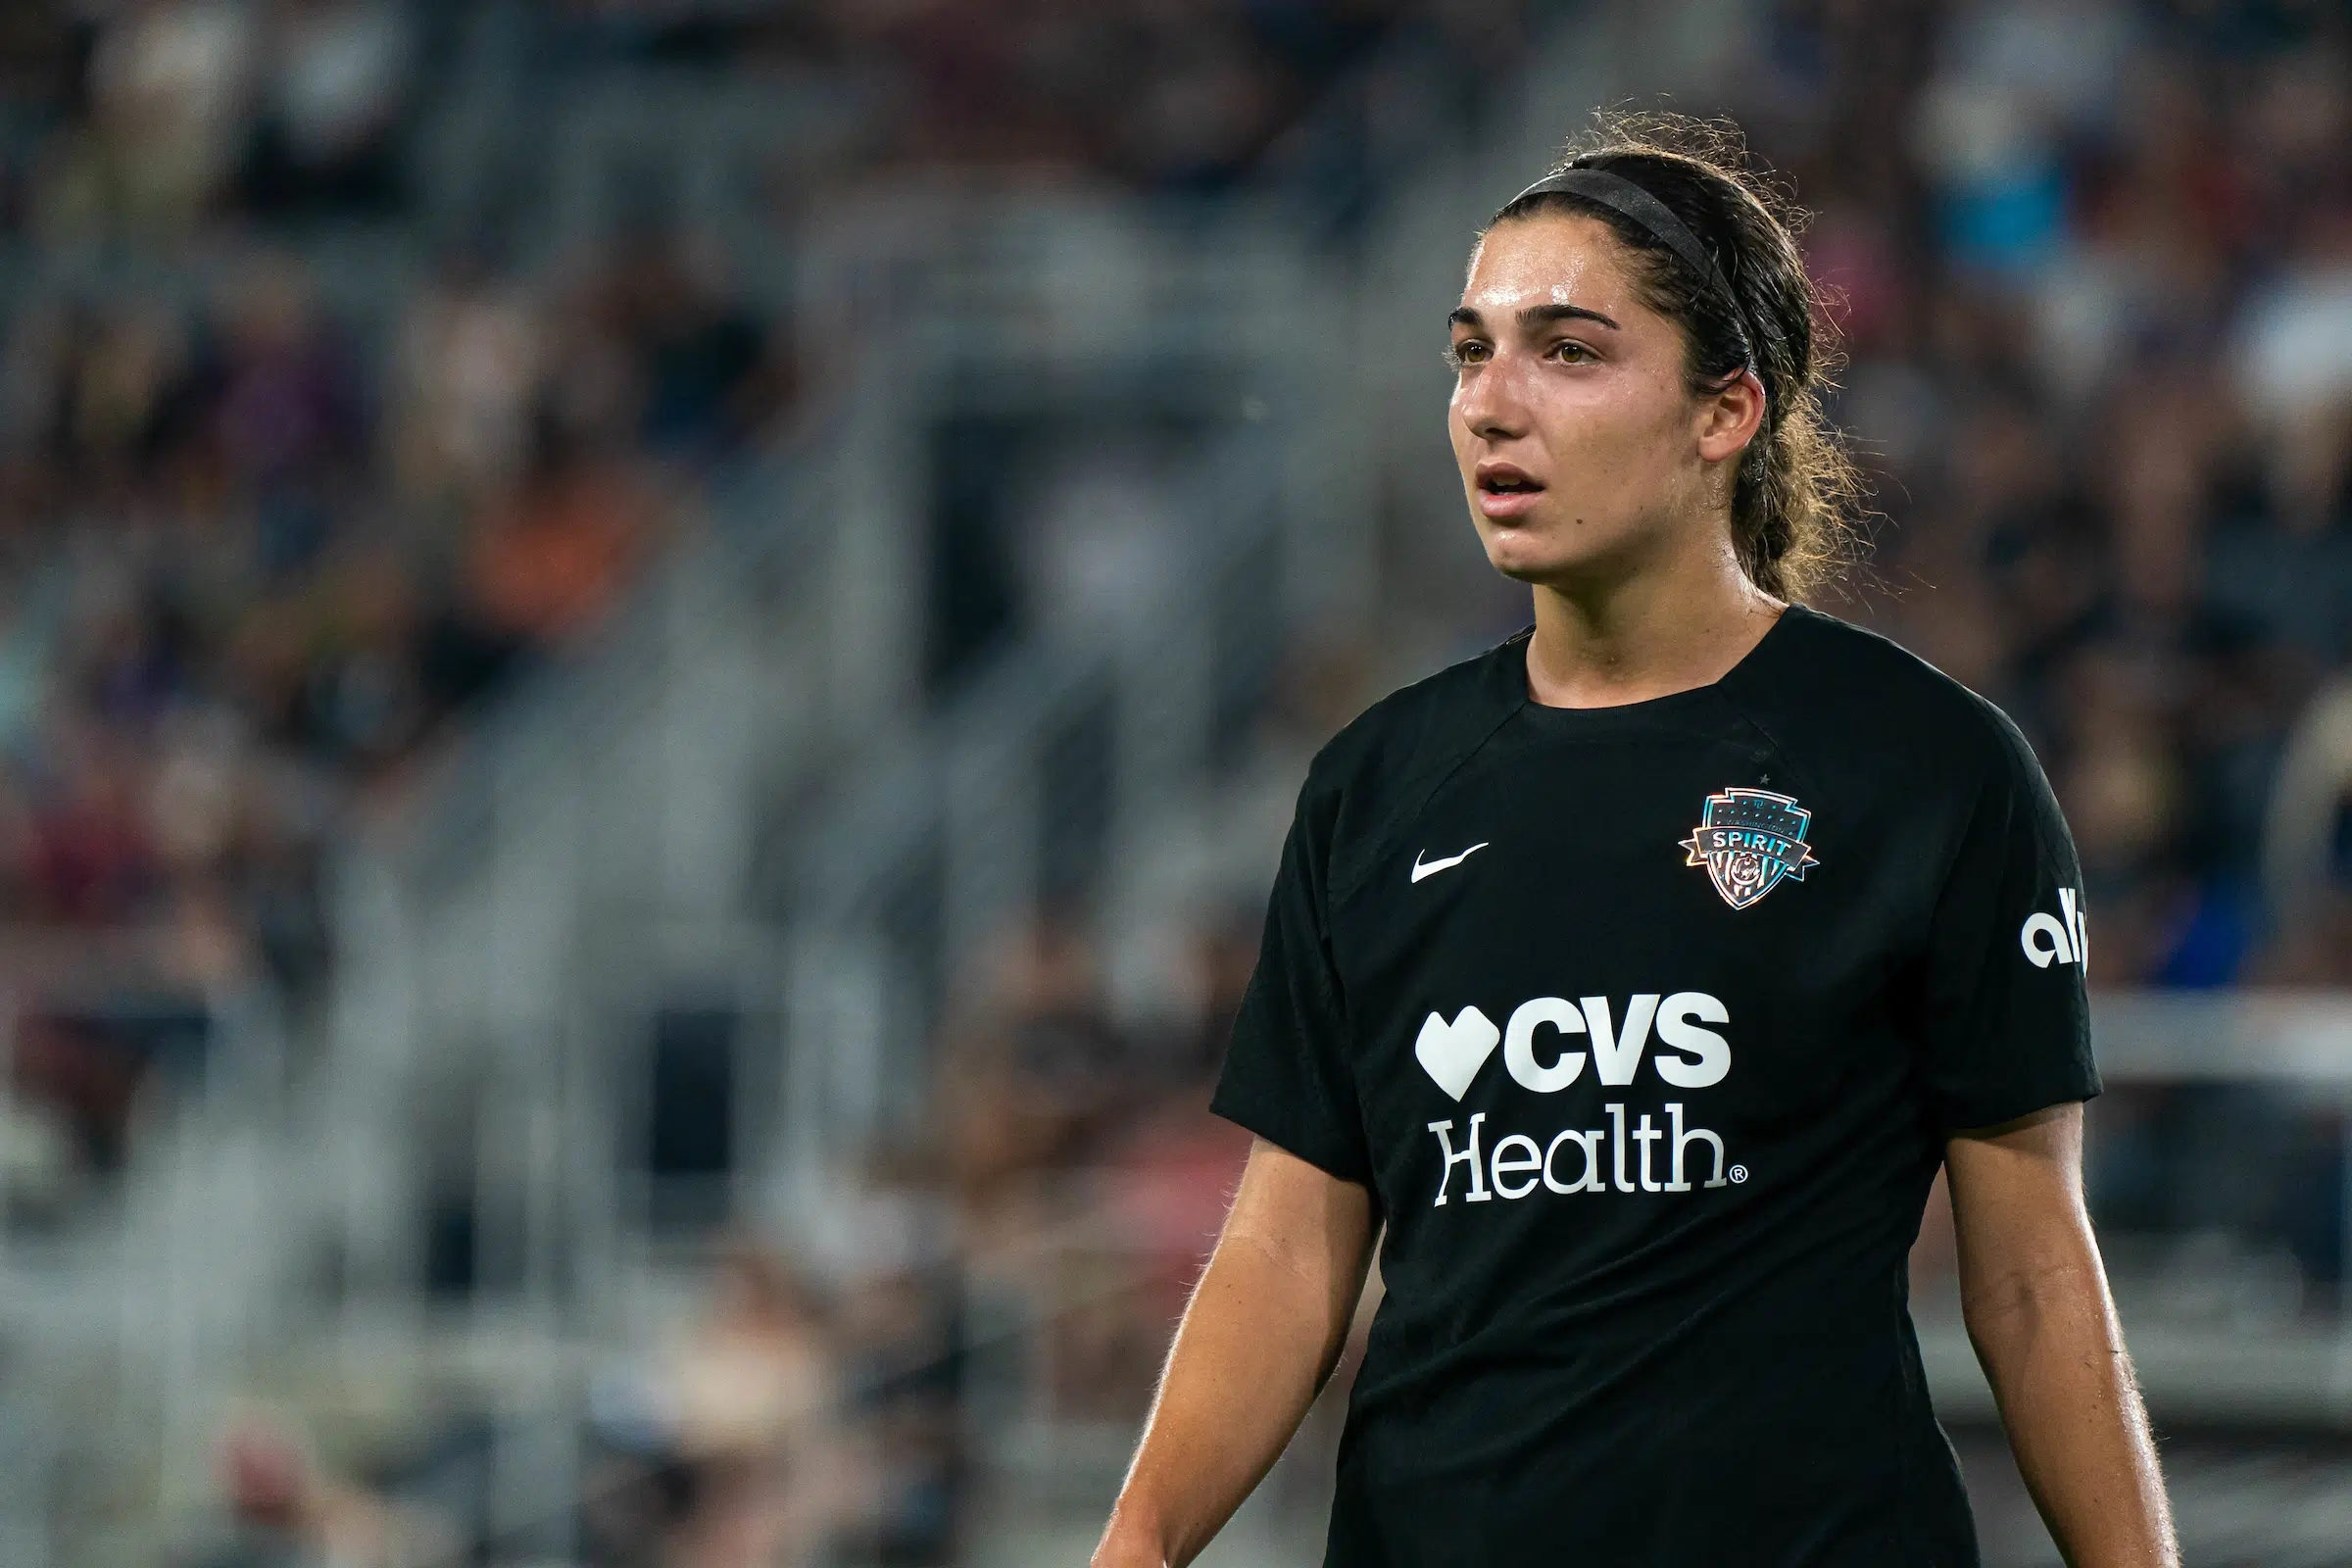 Lena Silano in a black uniform stands on a soccer field.